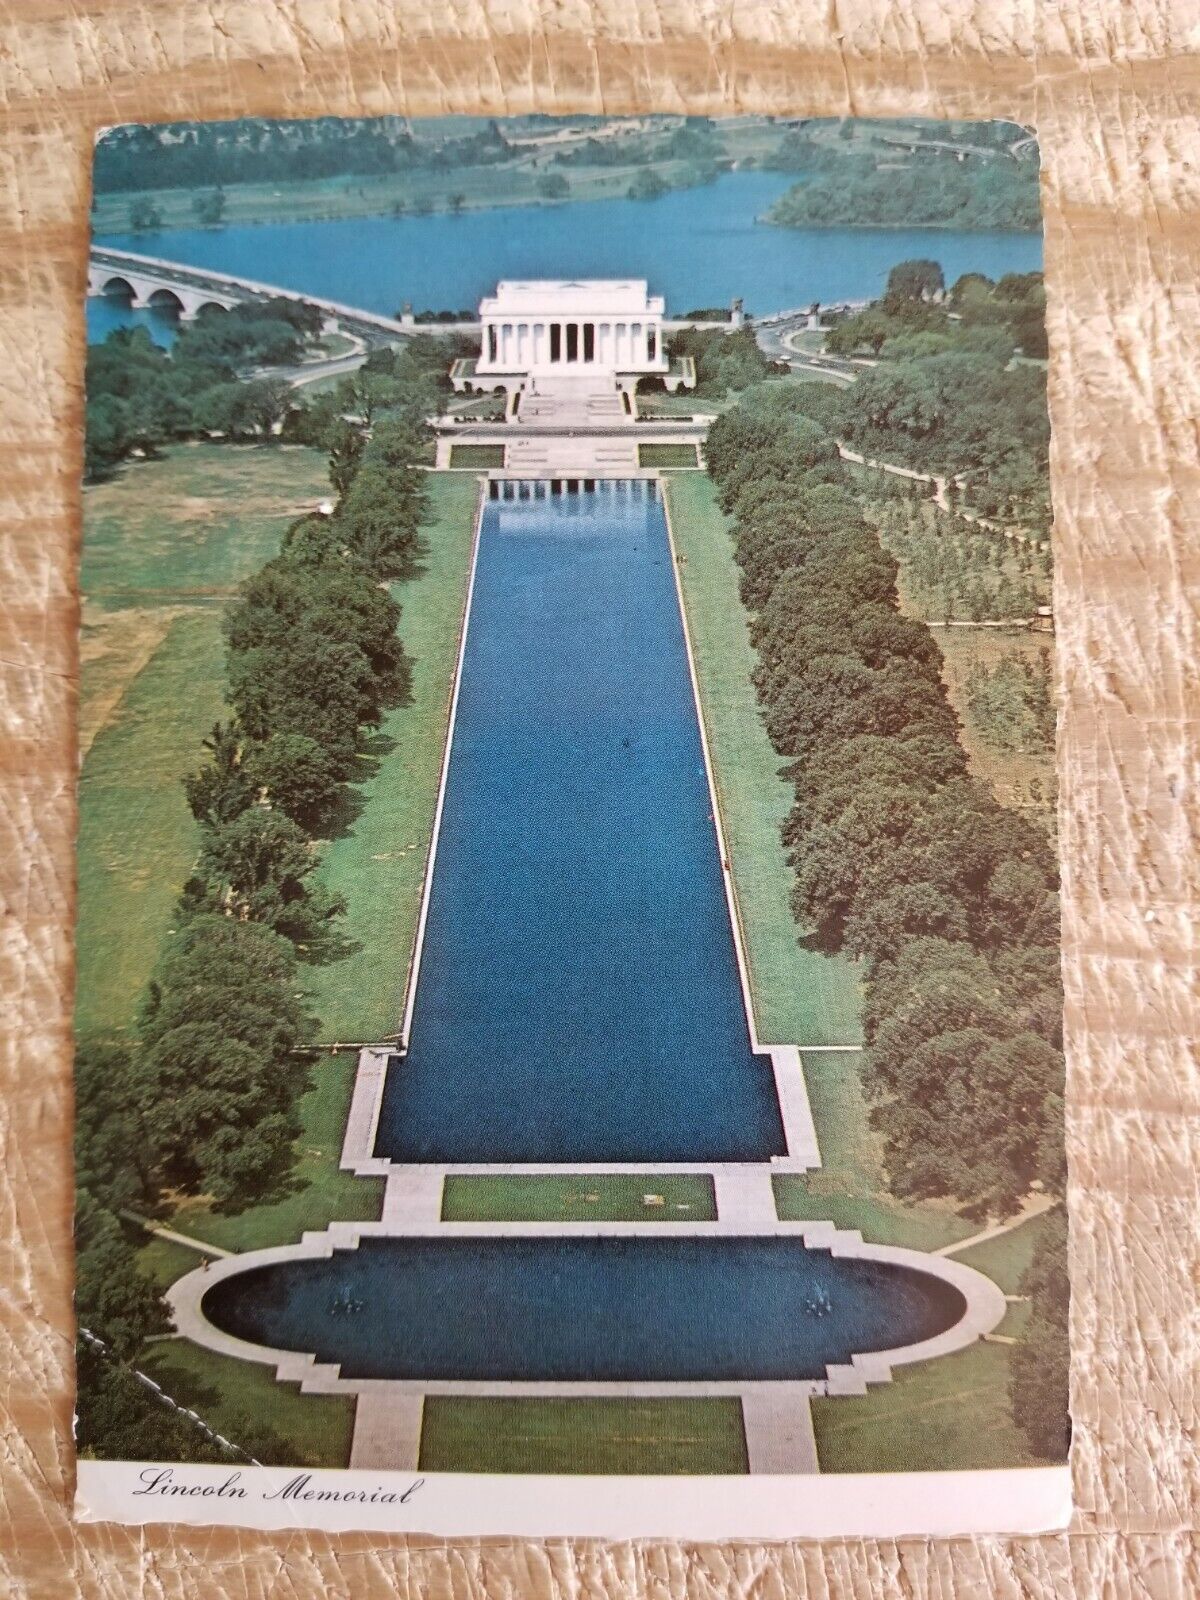 A VIEW OF THE LINCOLN MEMORIAL FROM TOP OF WASHINGTON MONUMENT.VTG POSTCARD